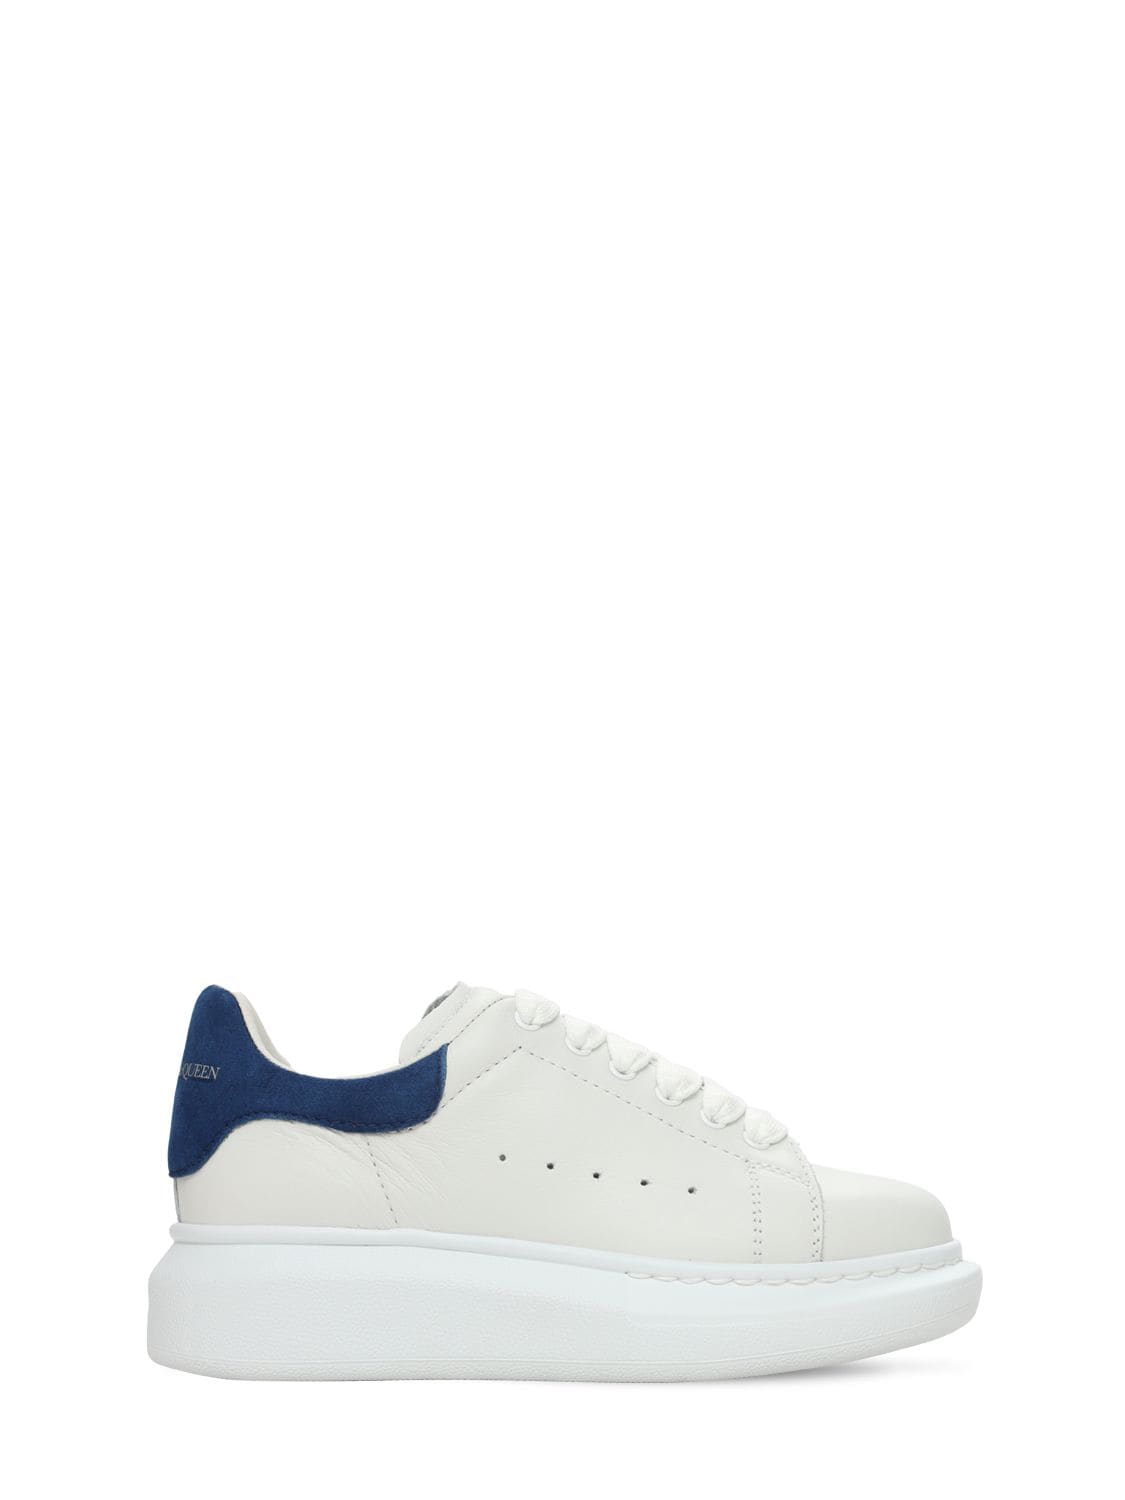 ALEXANDER MCQUEEN LEATHER LACE-UP SNEAKERS,73ILXS002-OTA4NG2